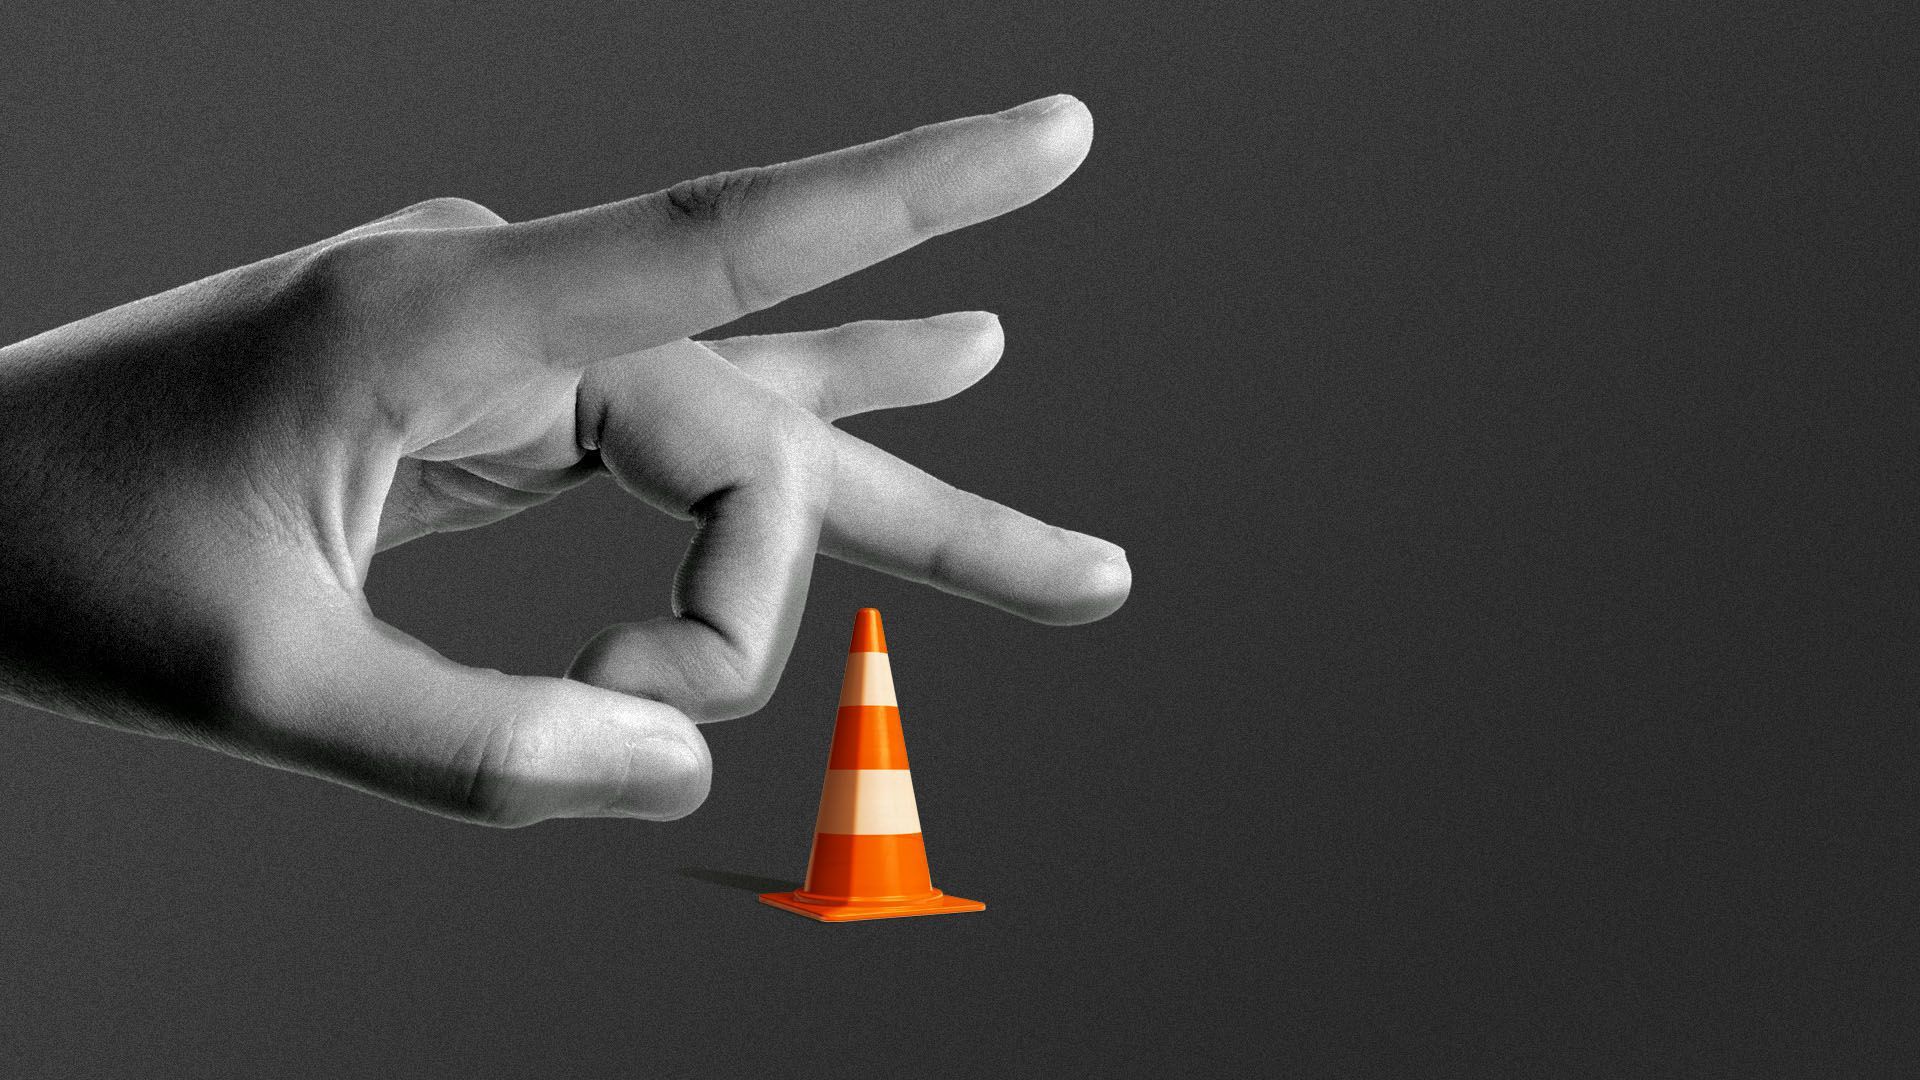 Graphic illustration of a hand about to flick a miniature traffic cone